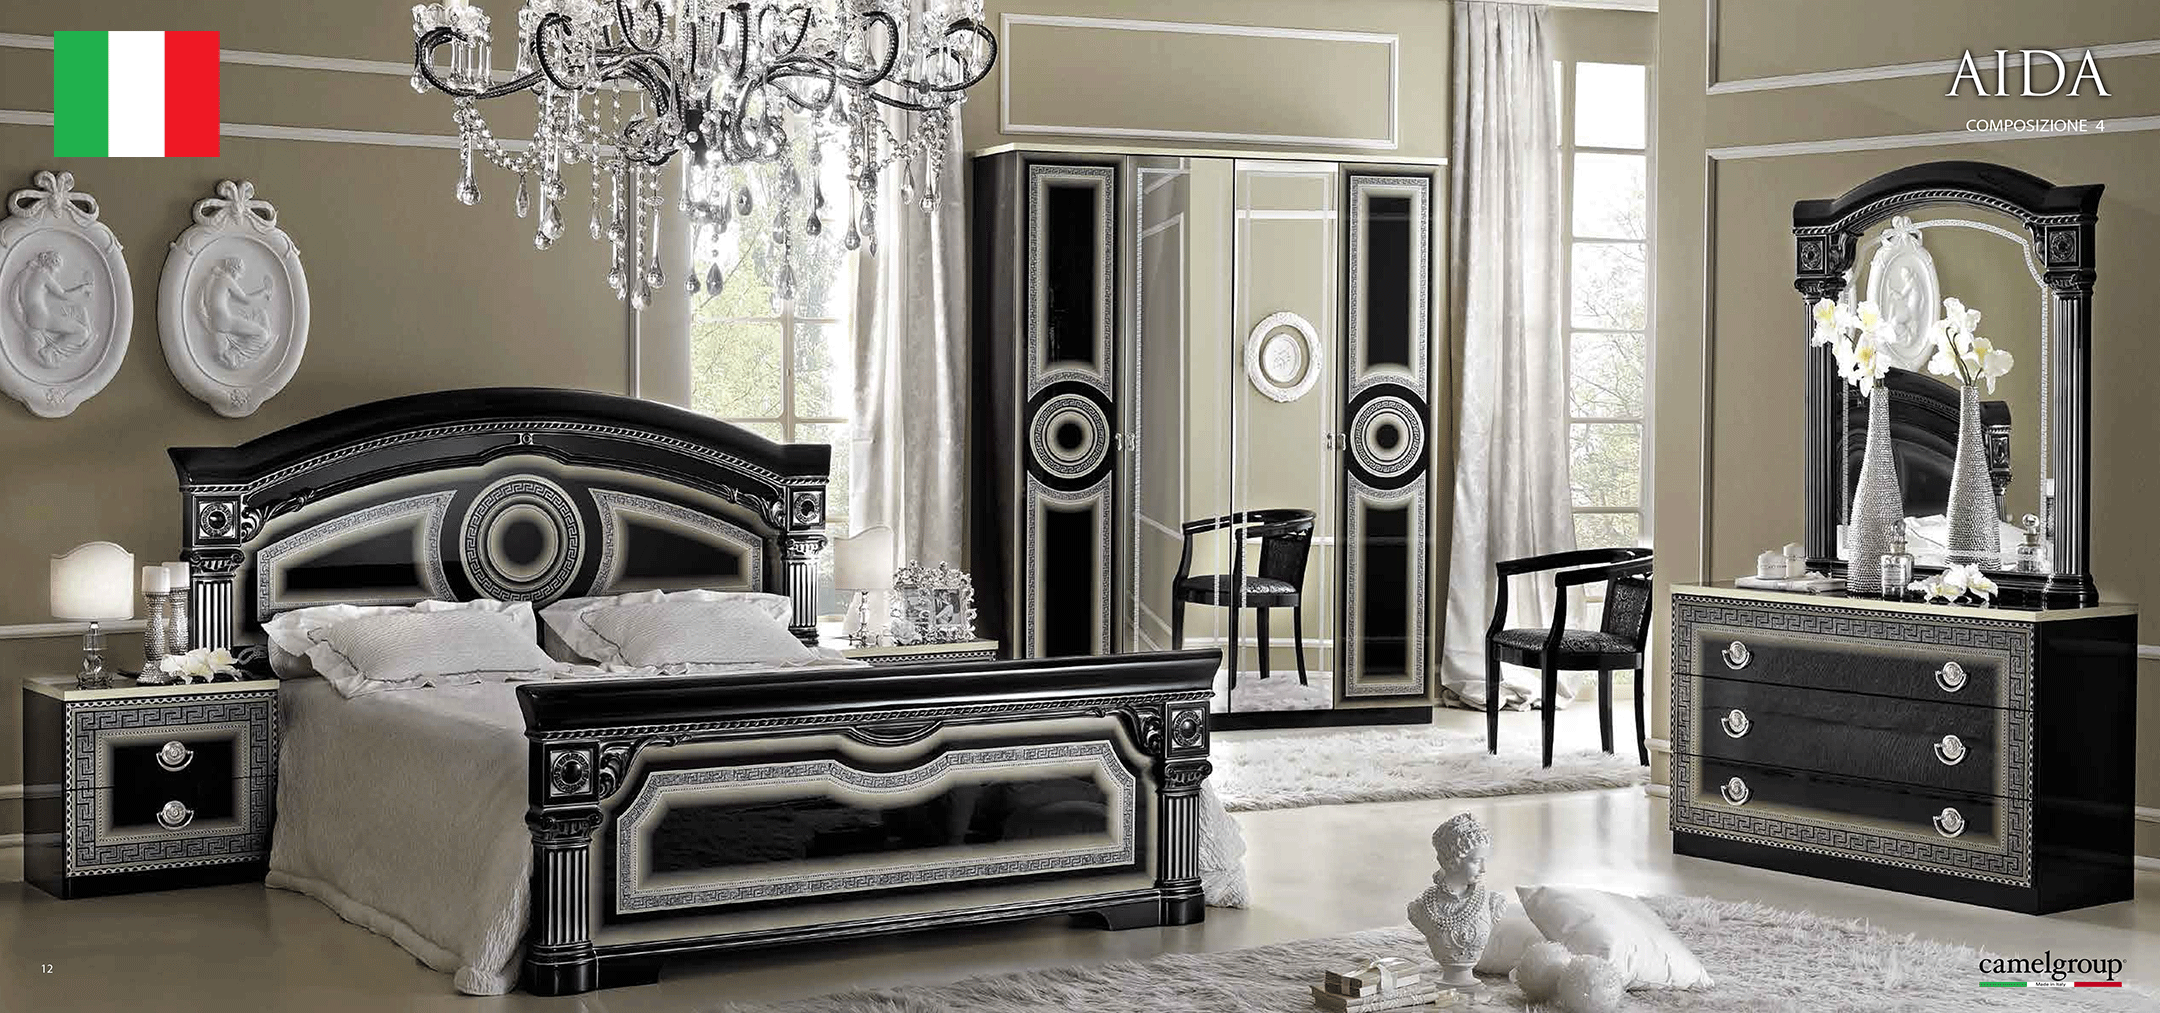 Brands Camel Gold Collection, Italy Aida Bedroom Black/Silver, Camelgroup Italy